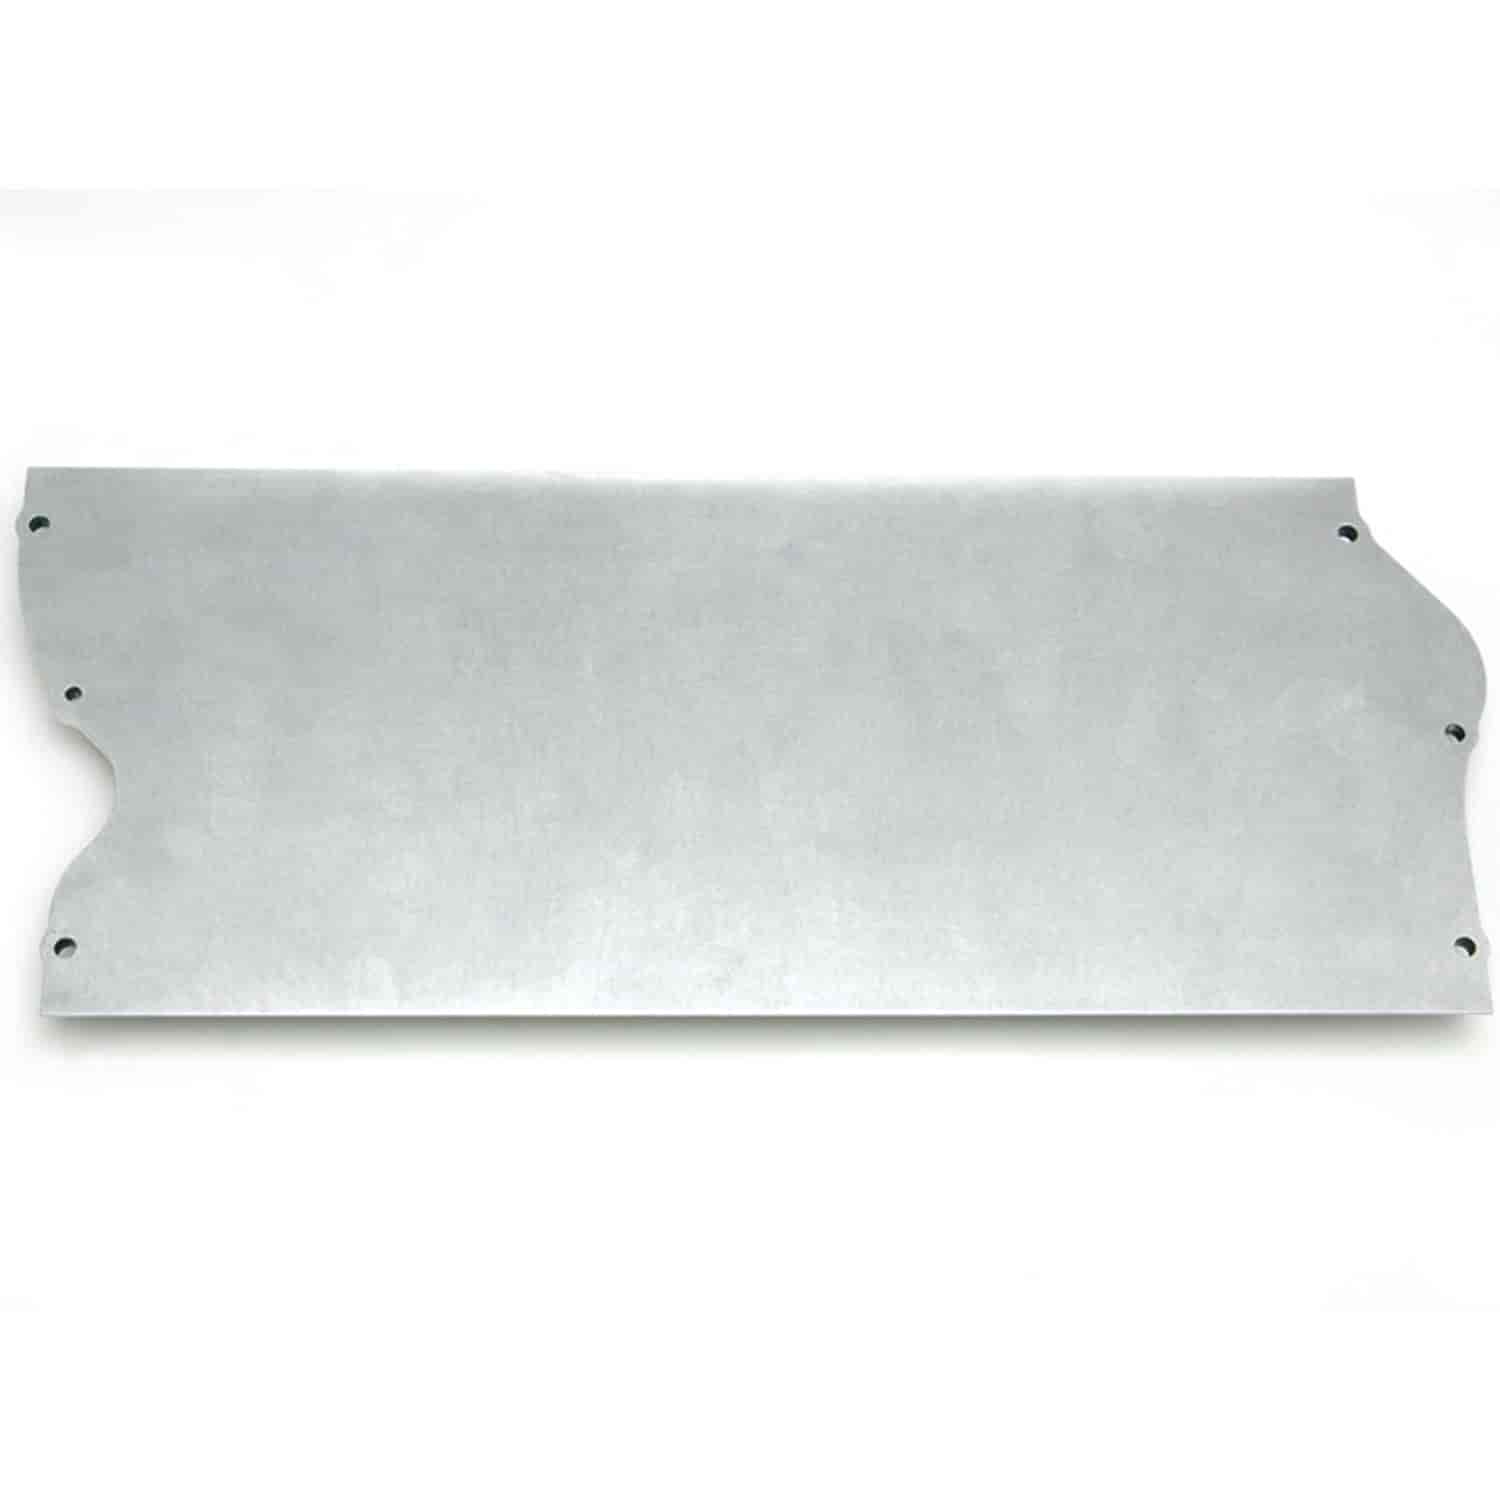 Valley Cover Standard Ford 351W 9.5" Deck Block